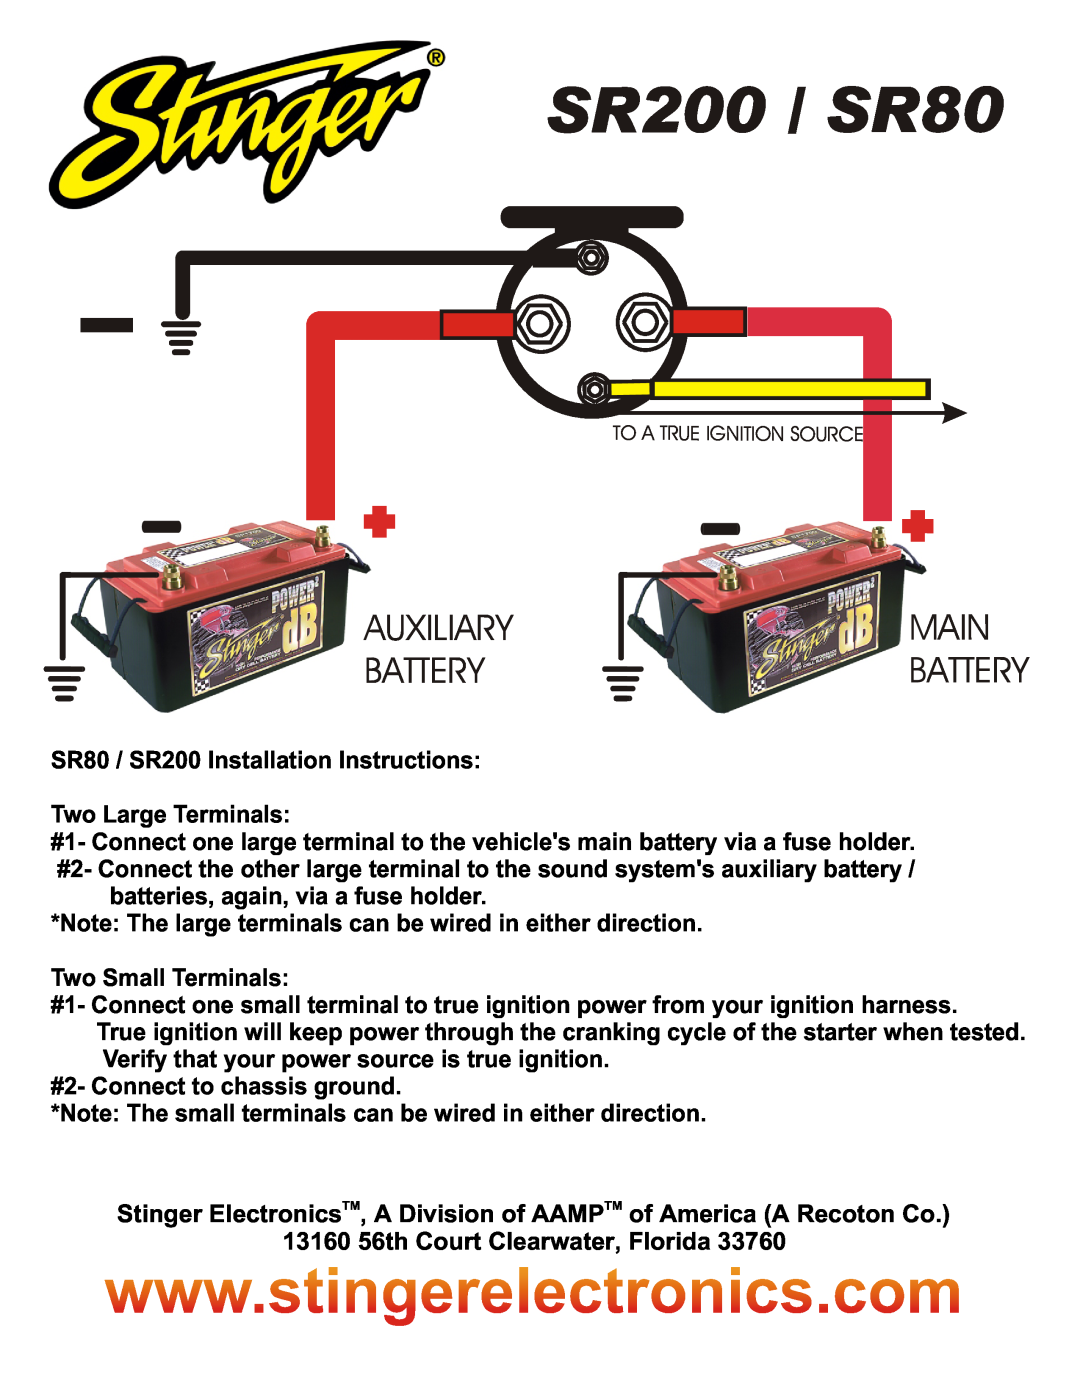 Stinger SR80, SR200 installation instructions Auxiliarymain Batterybattery, 13160 56th Court Clearwater, Florida 